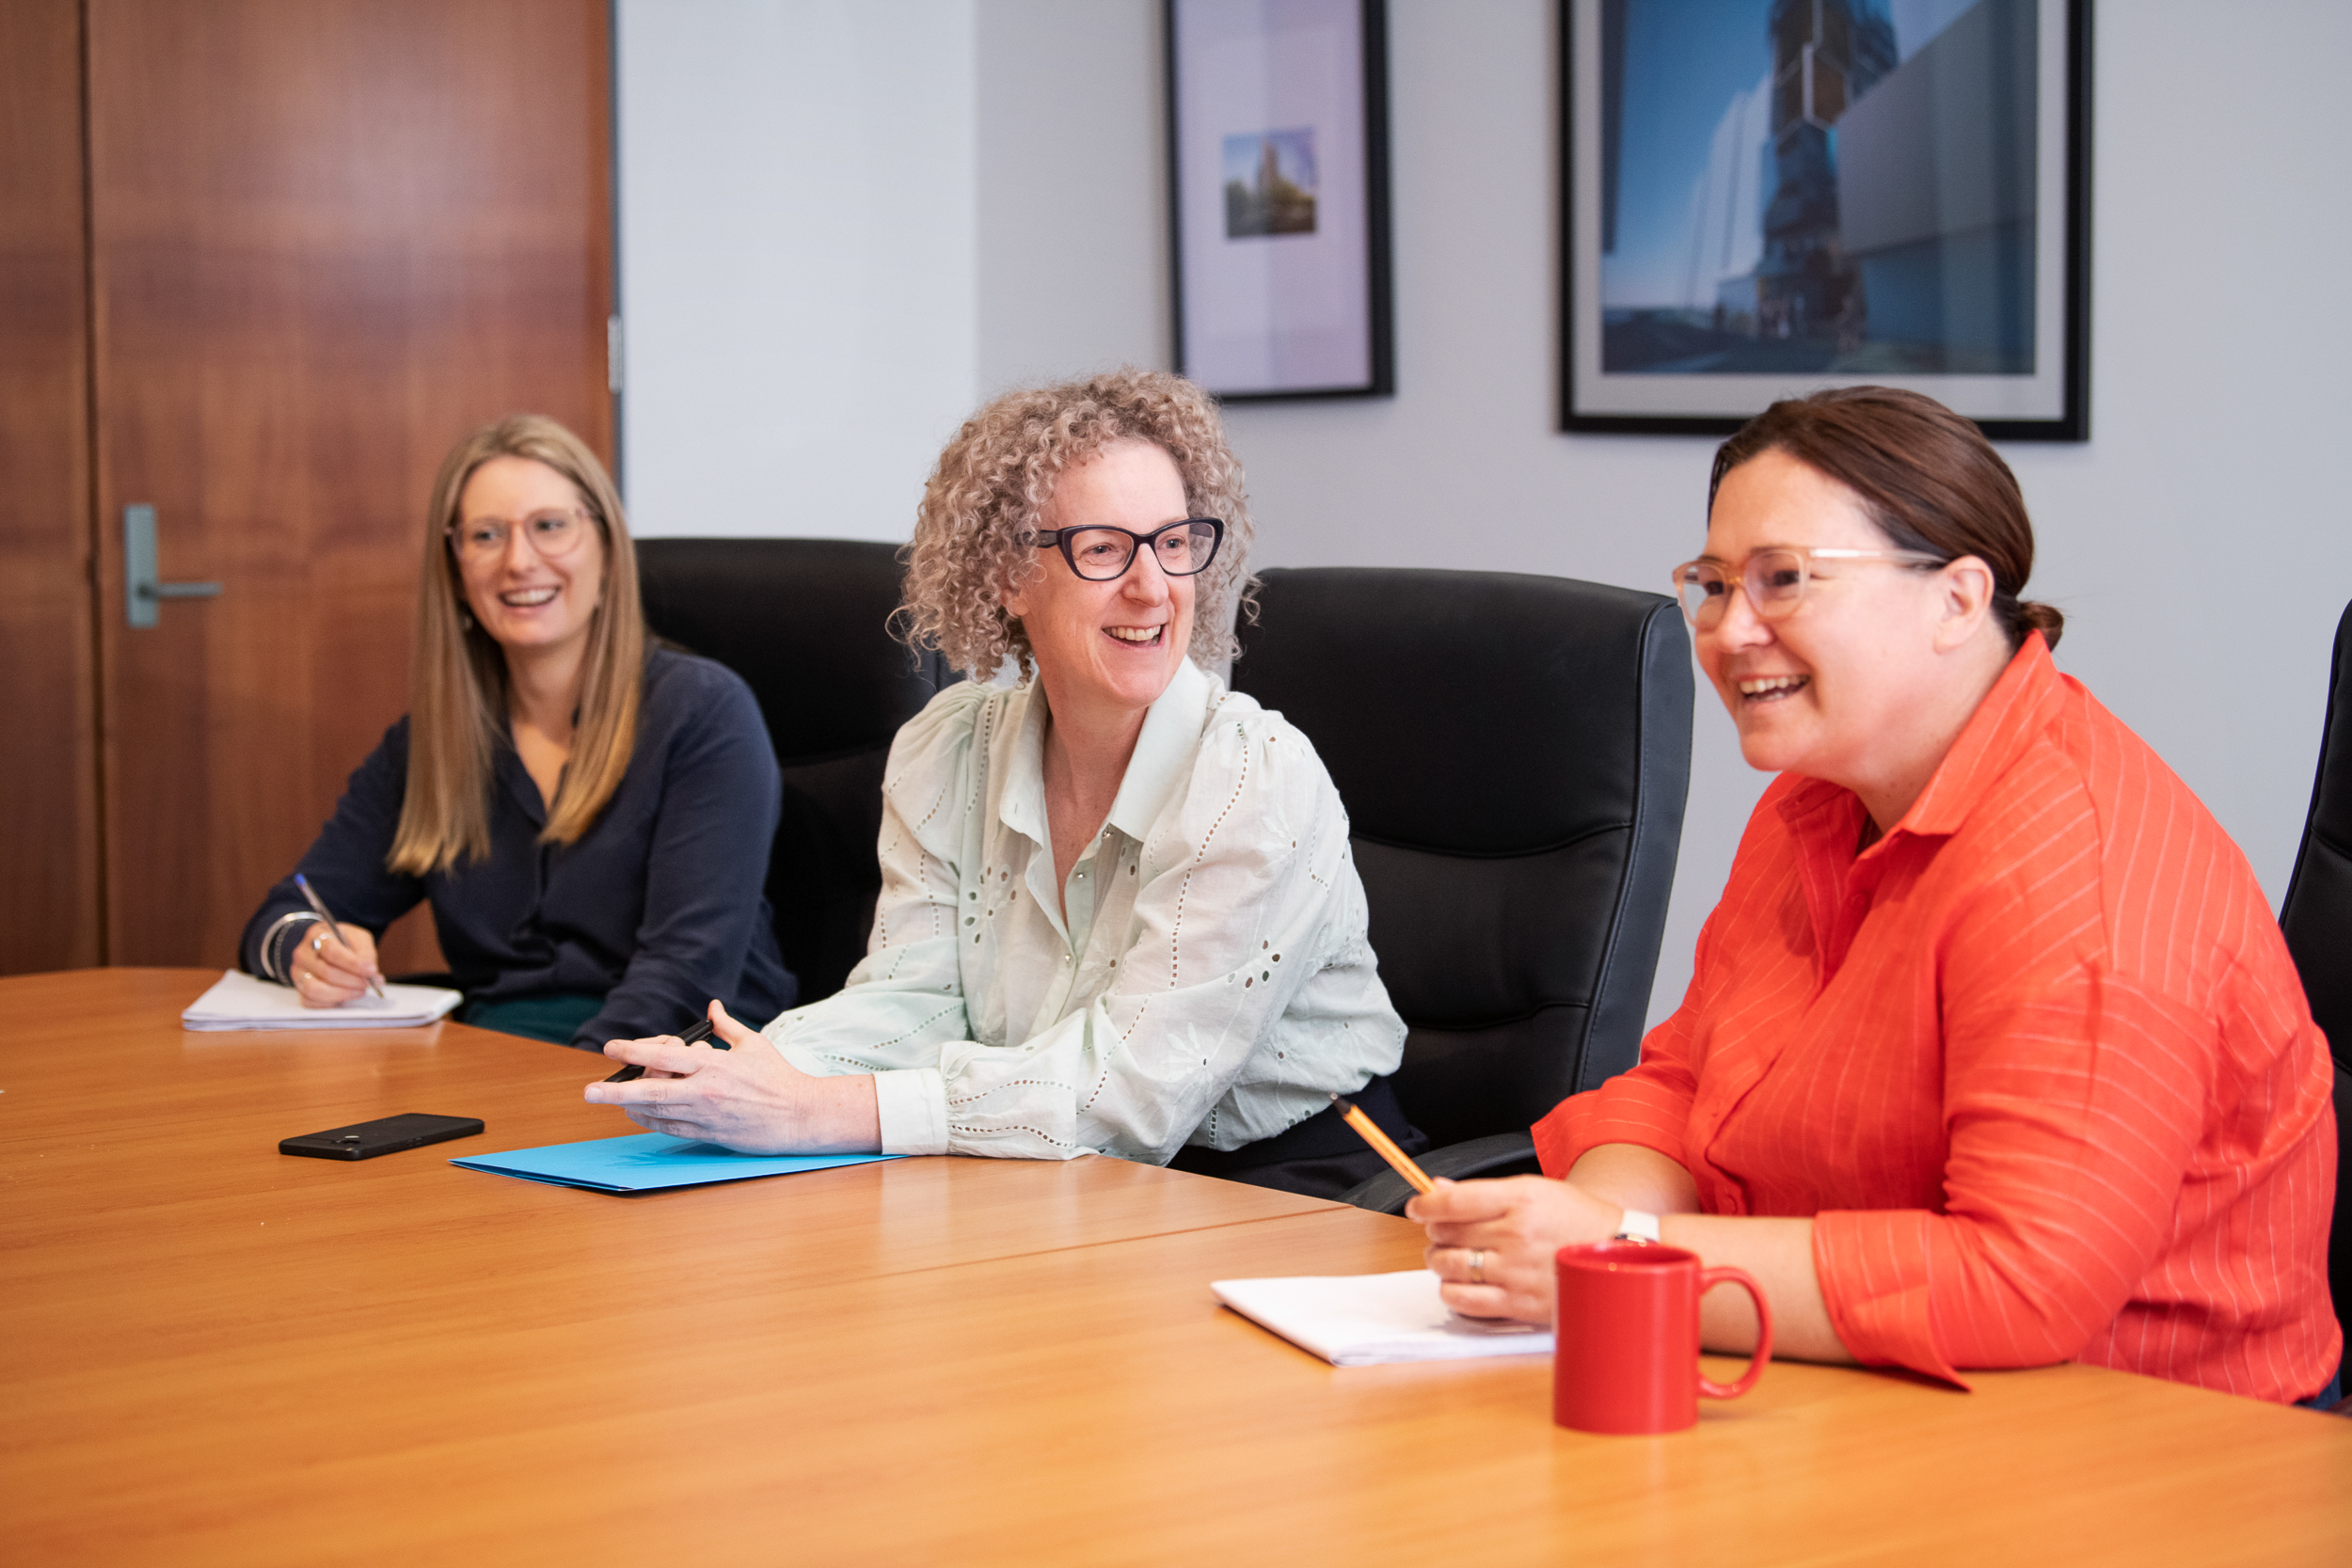 Melbourne team and staff photography. Personal branding group portraits of team collaborating and working together. Group of women smiling at each other in boardroom.